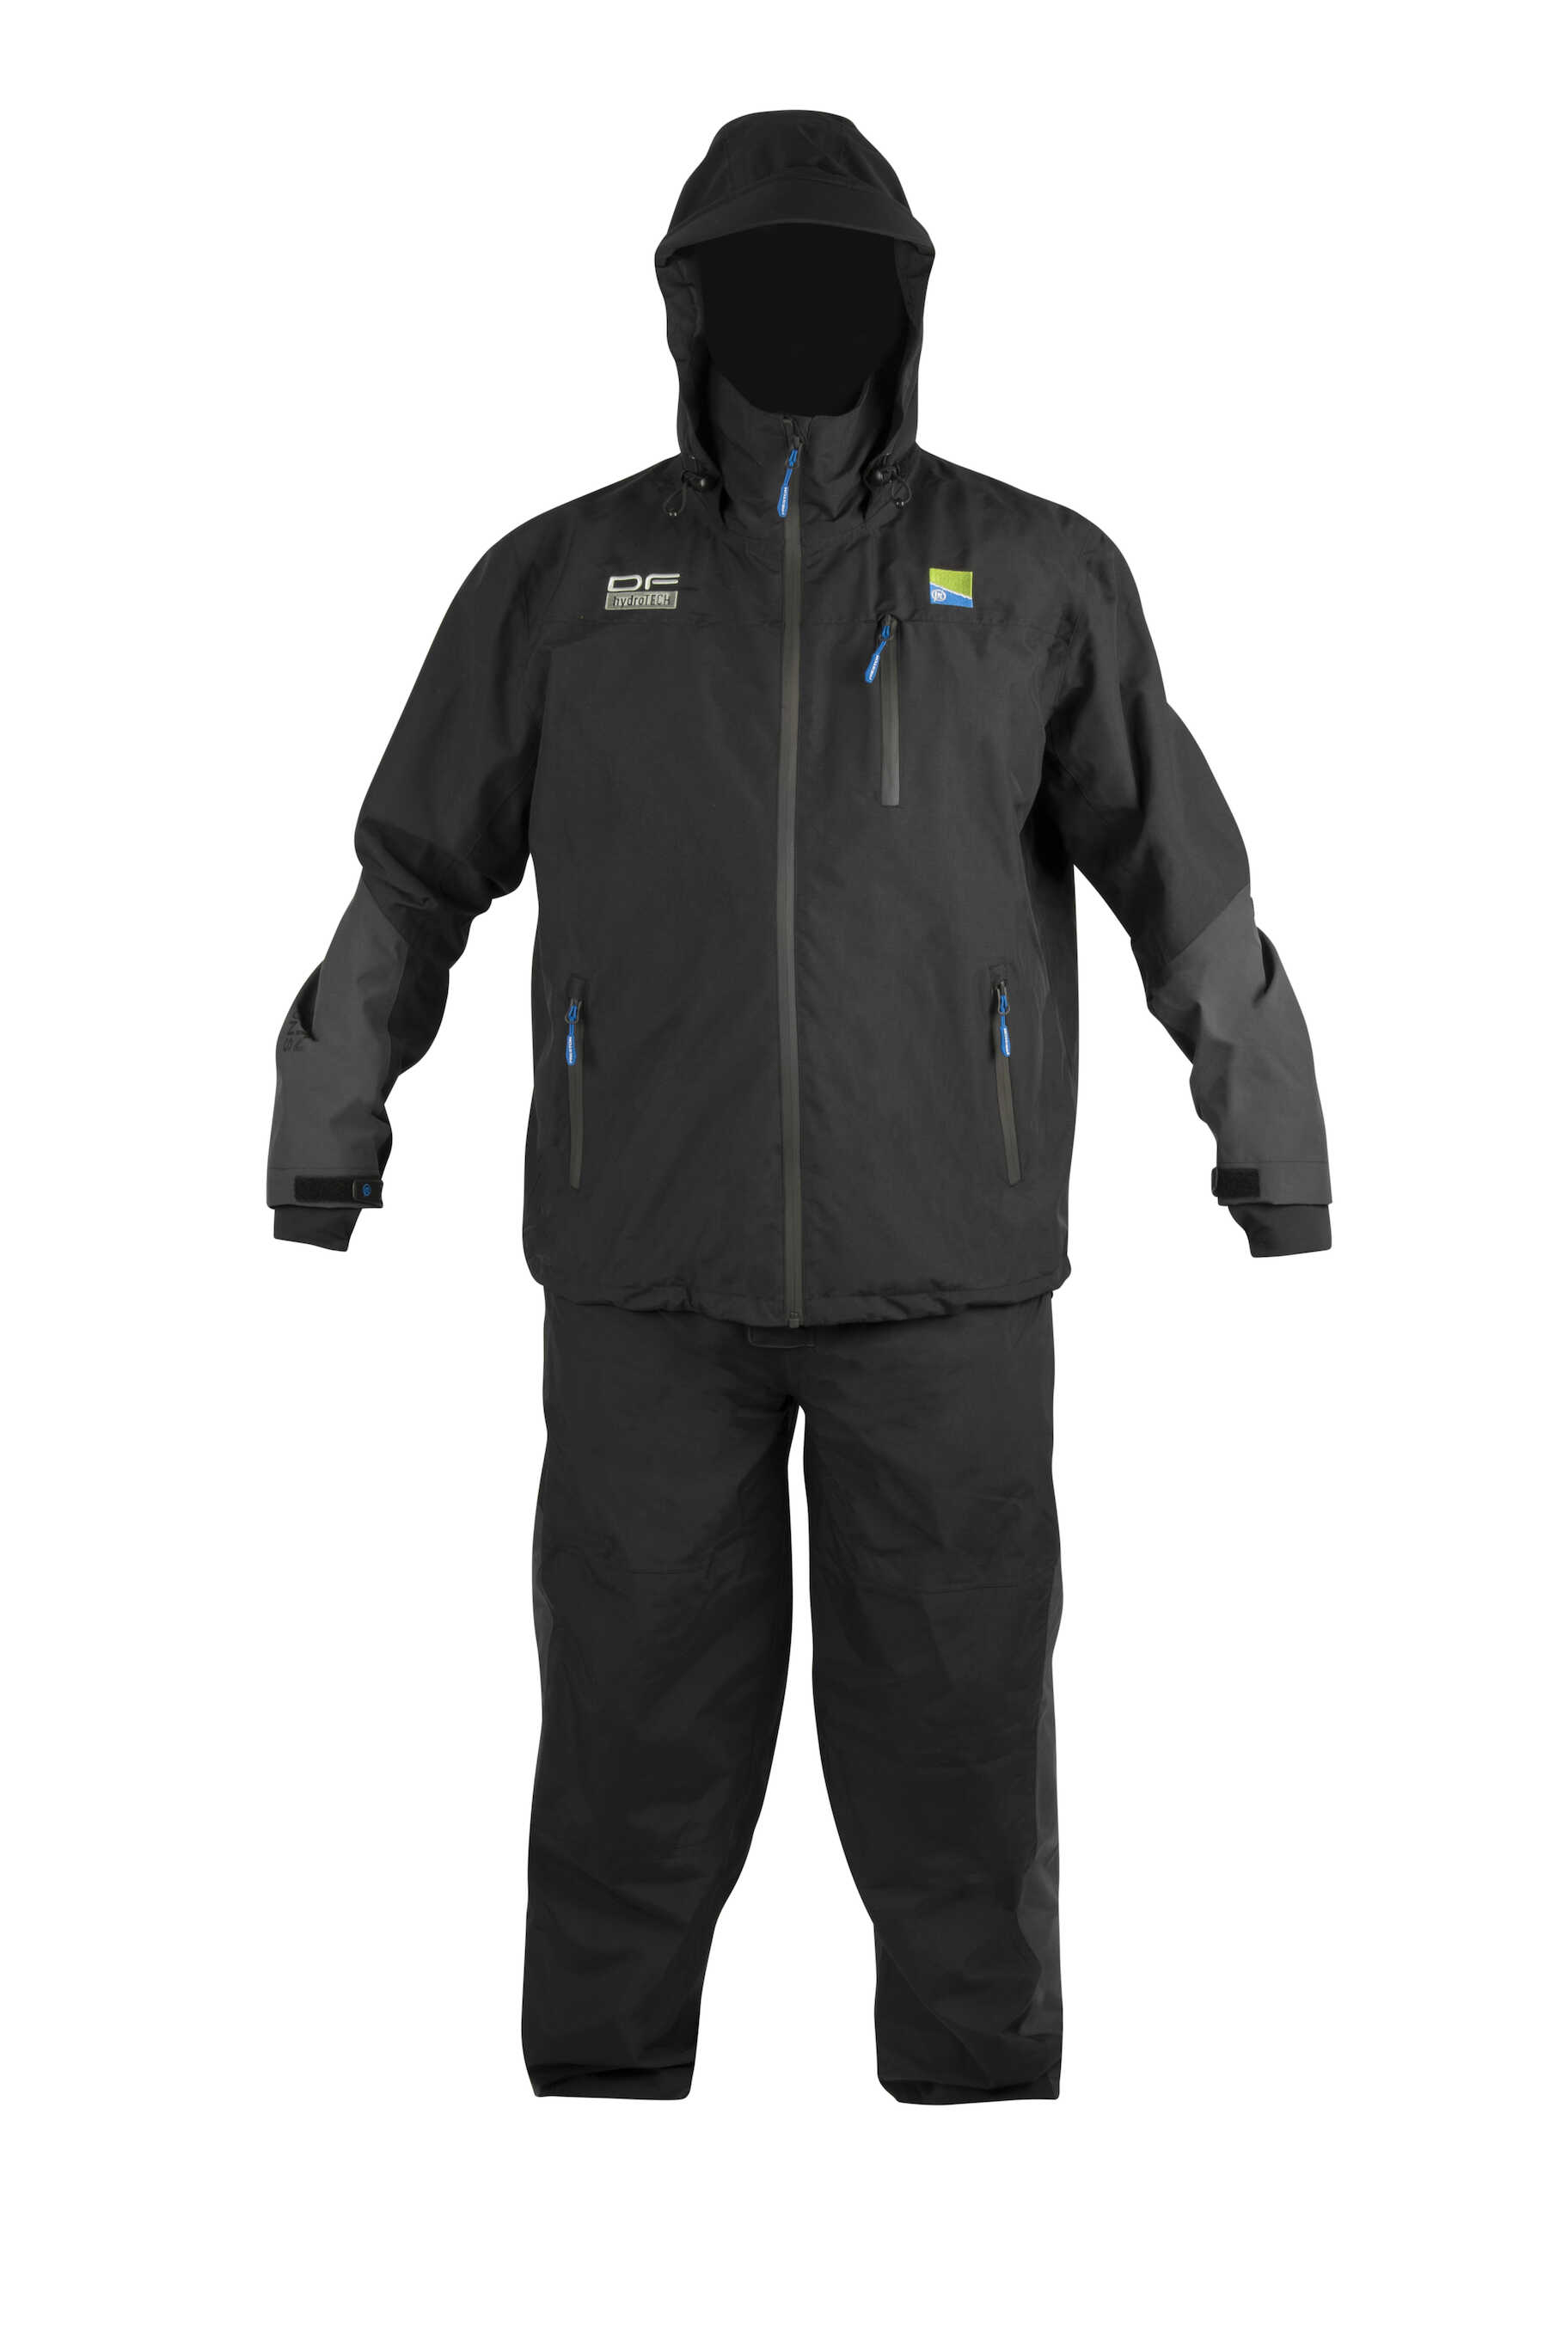 Preston Innovations DF Hydrotech Suits